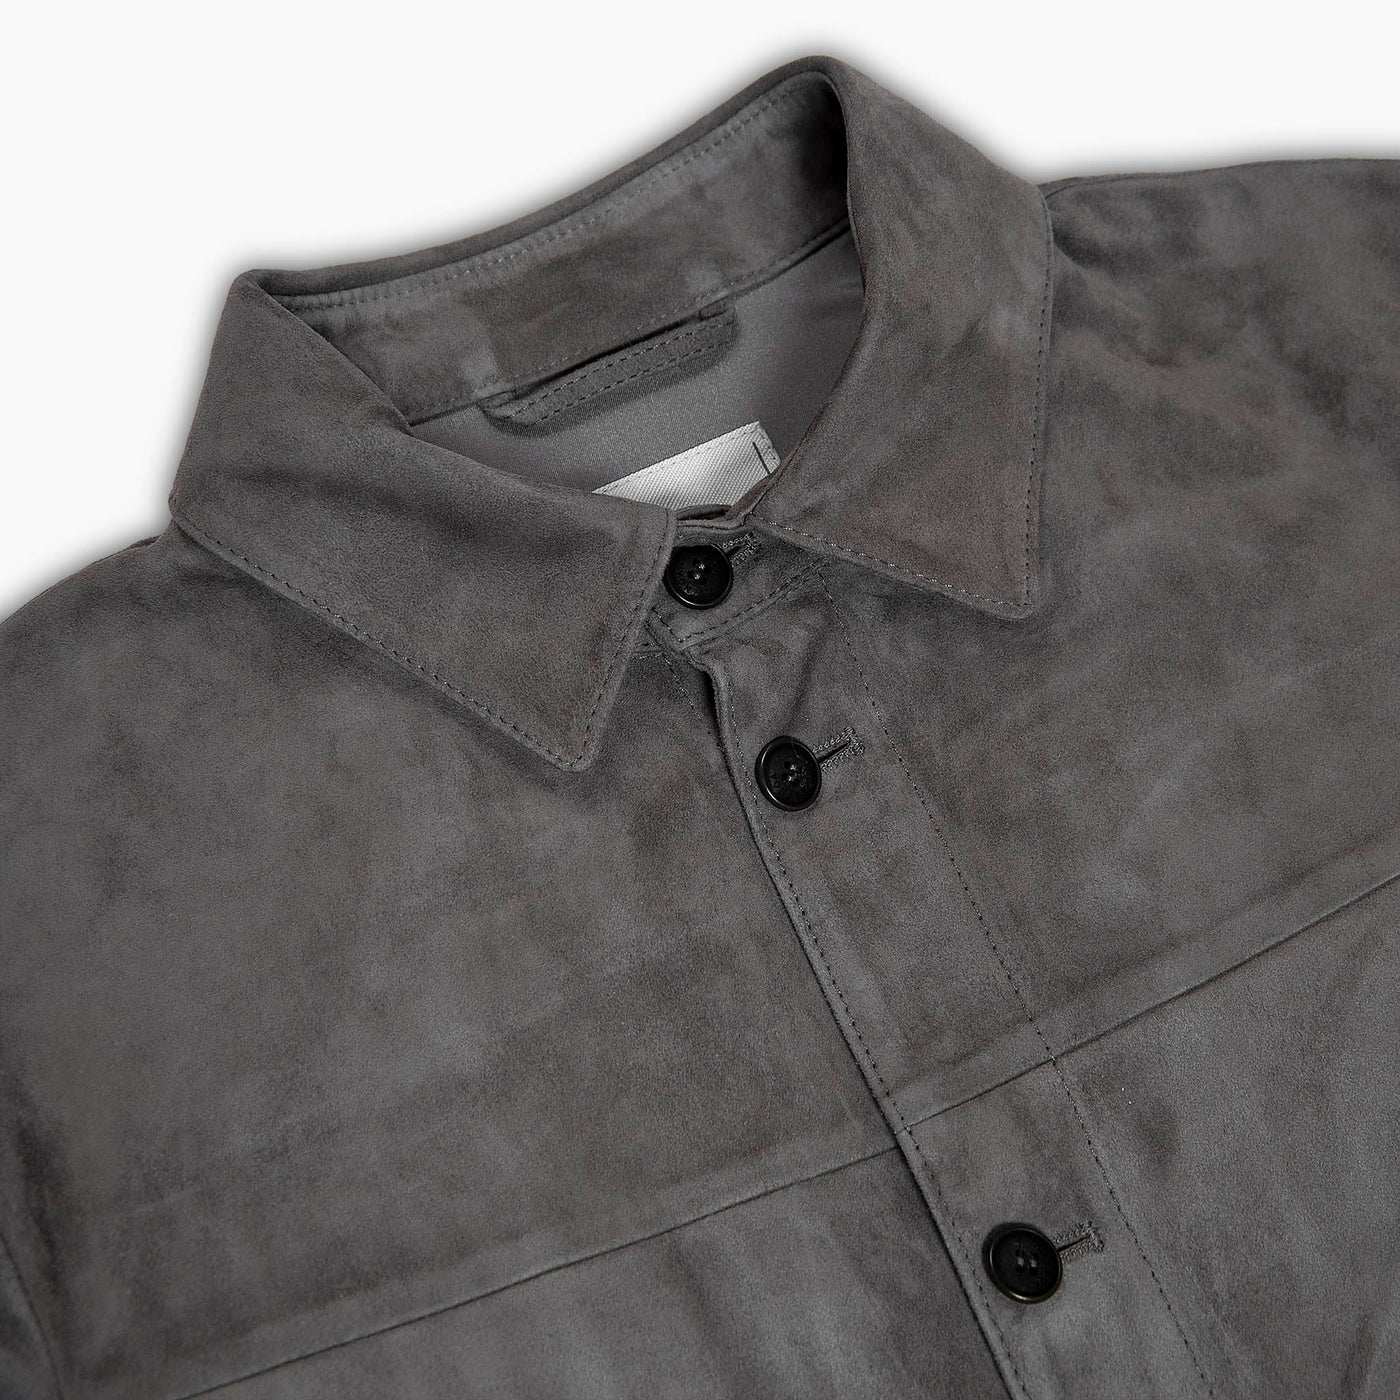 Lazare shirt leather jacket(suede)